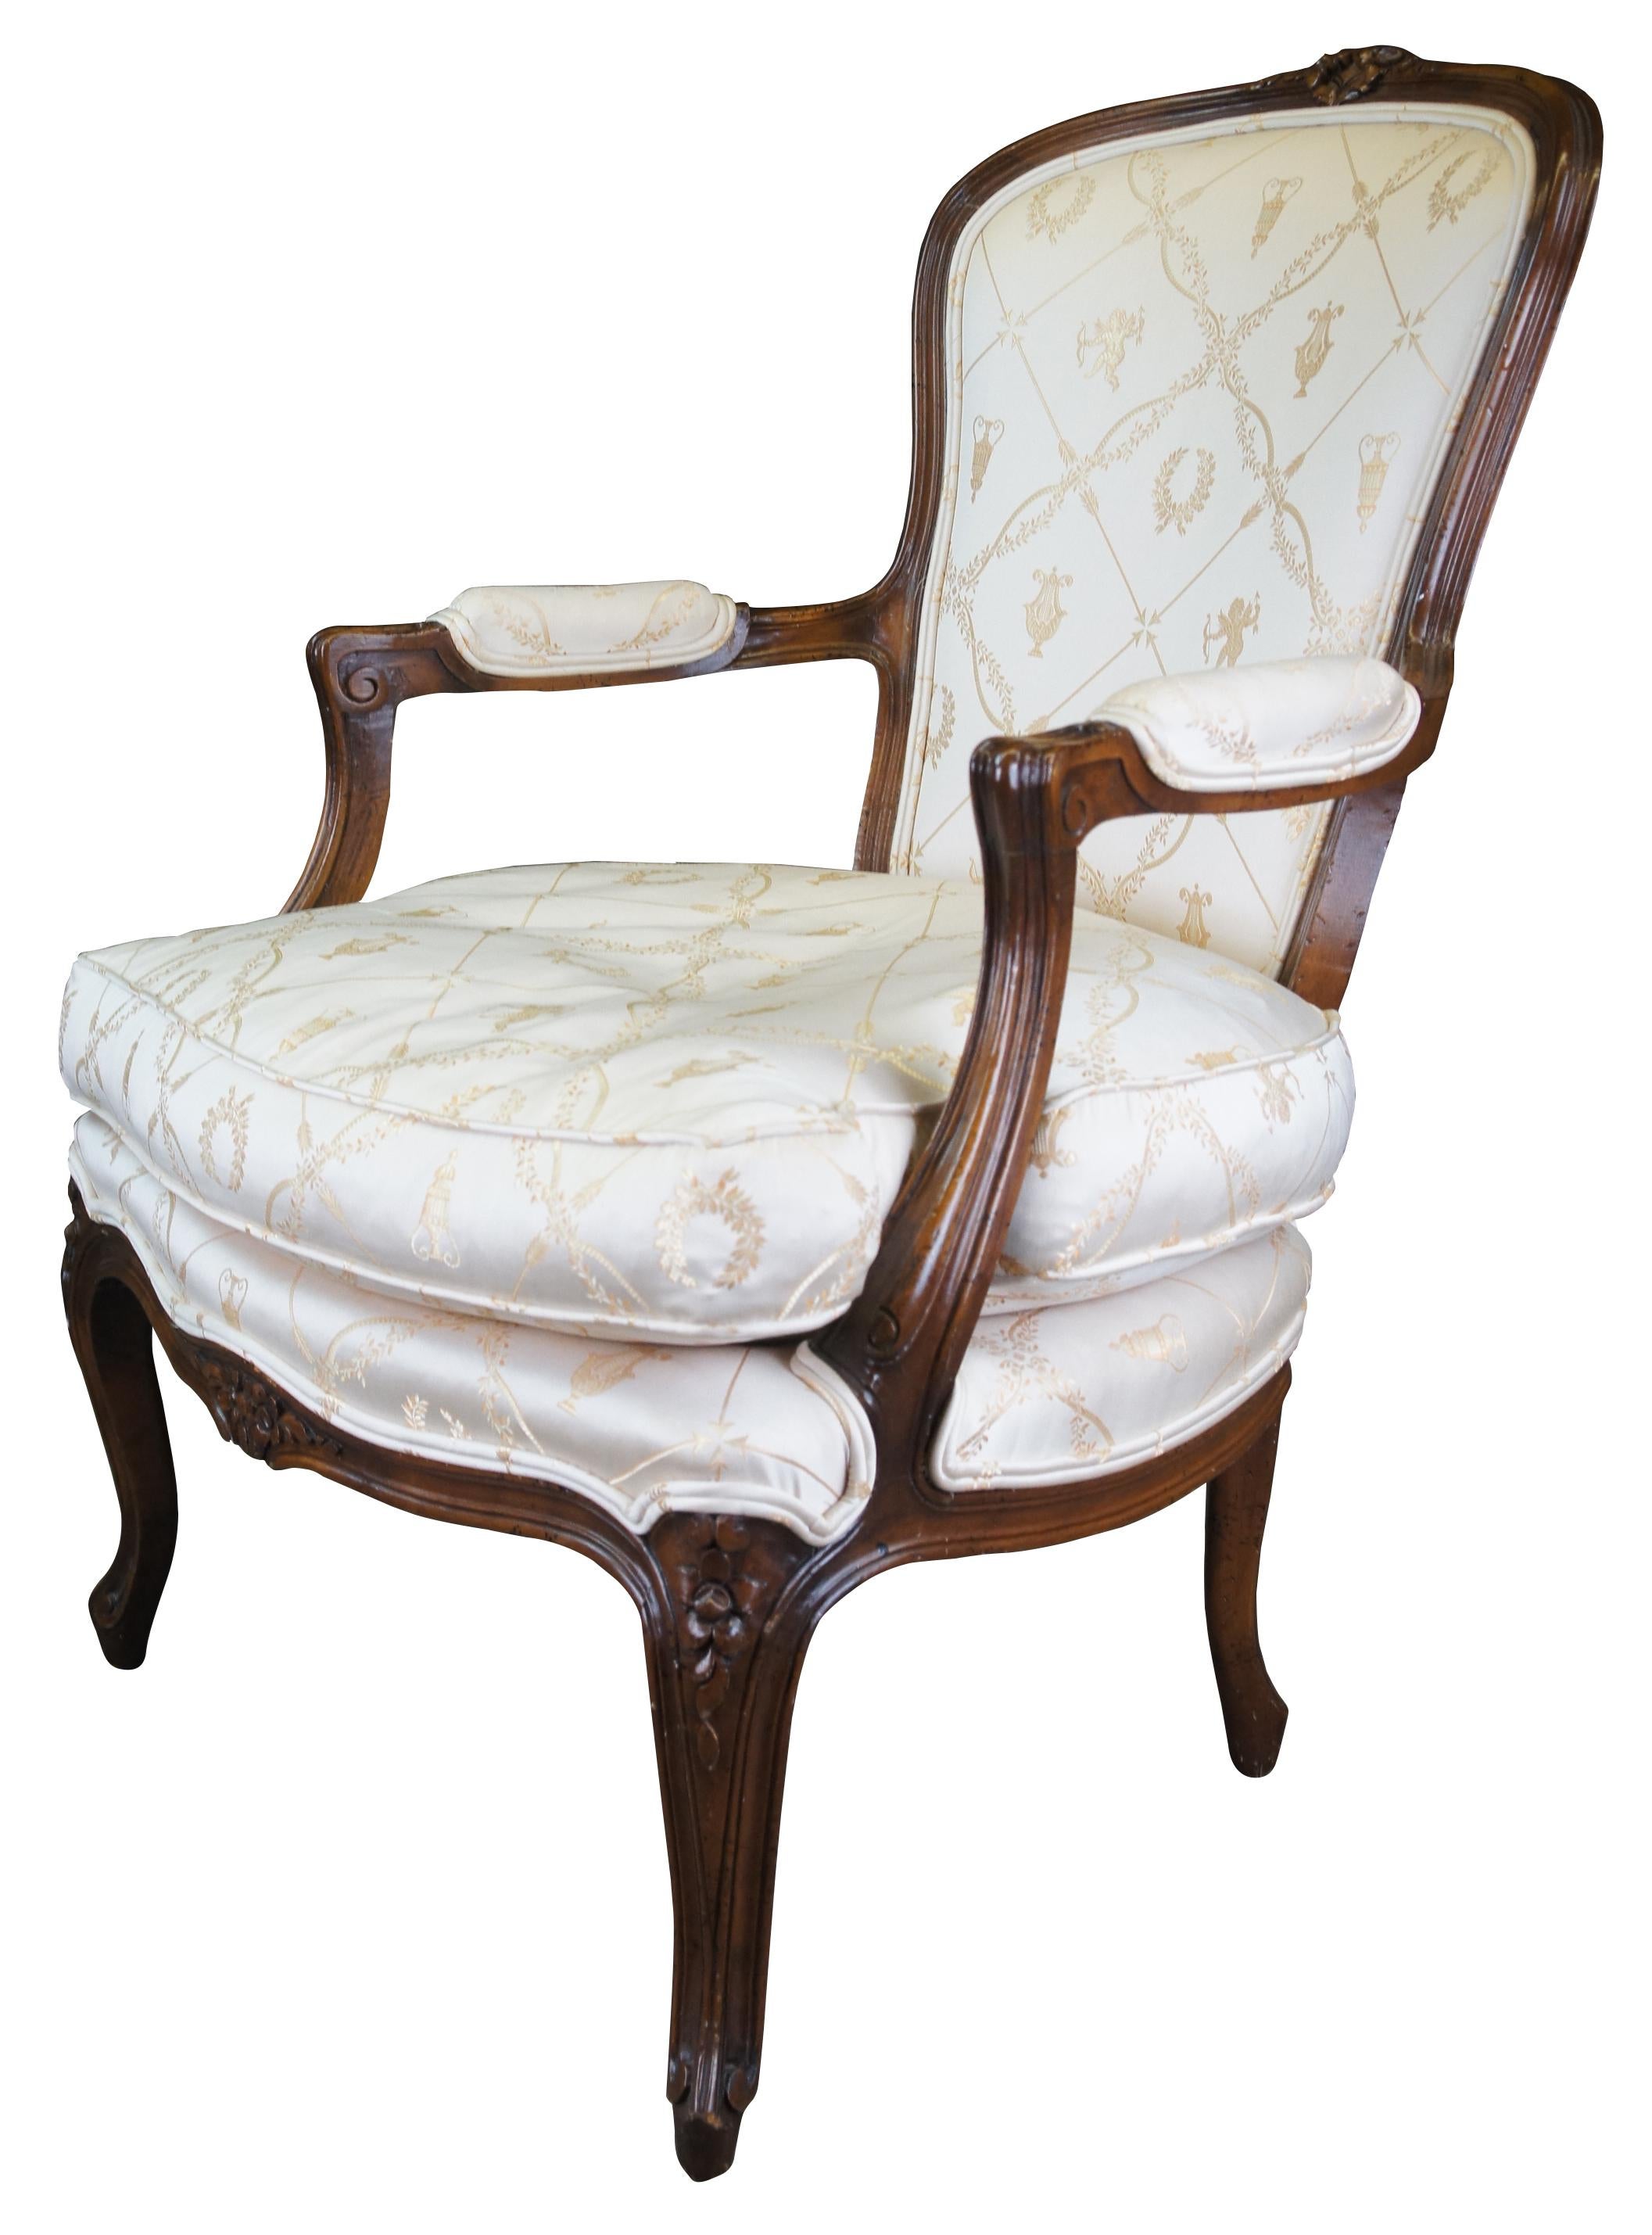 An exquisite French Fauteuil chair by W & J Sloane Inc. Made from naturally distressed walnut with foliate carvings, padded scrolled arms, and cabriole legs. The chair is upholstered in an amazing classical fabric featuring a geometric arrow pattern